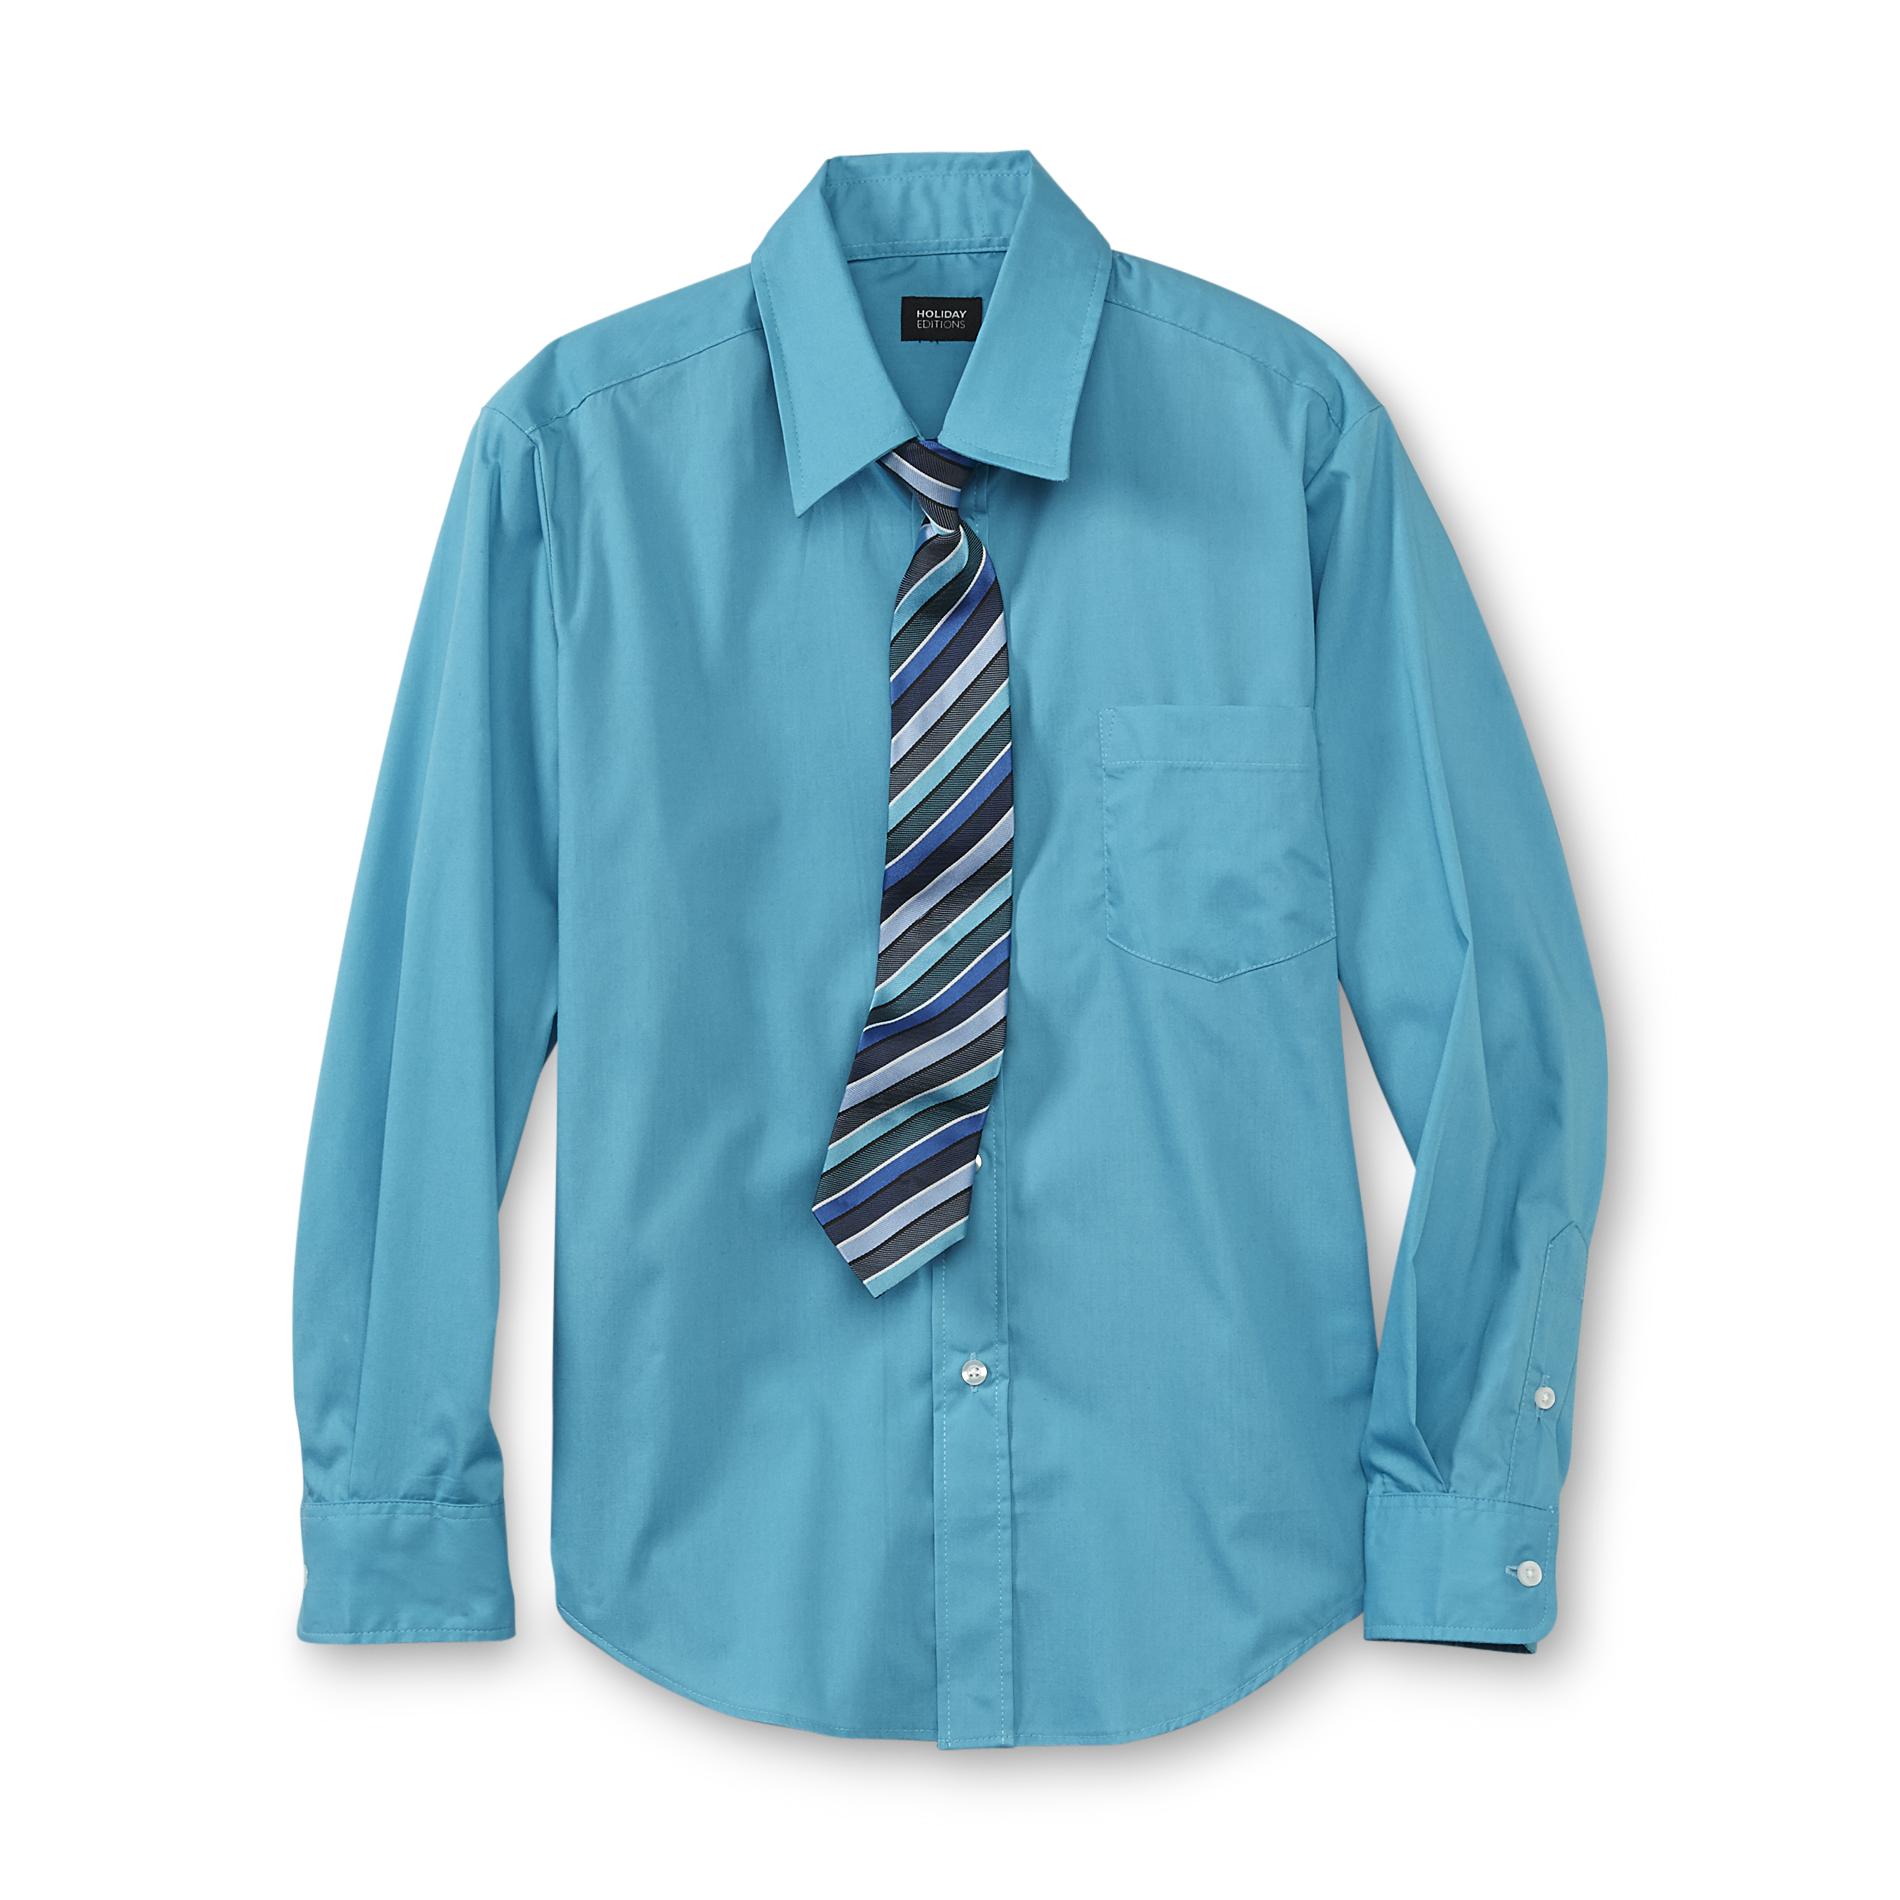 Holiday Editions Boy's Dress Shirt & Tie